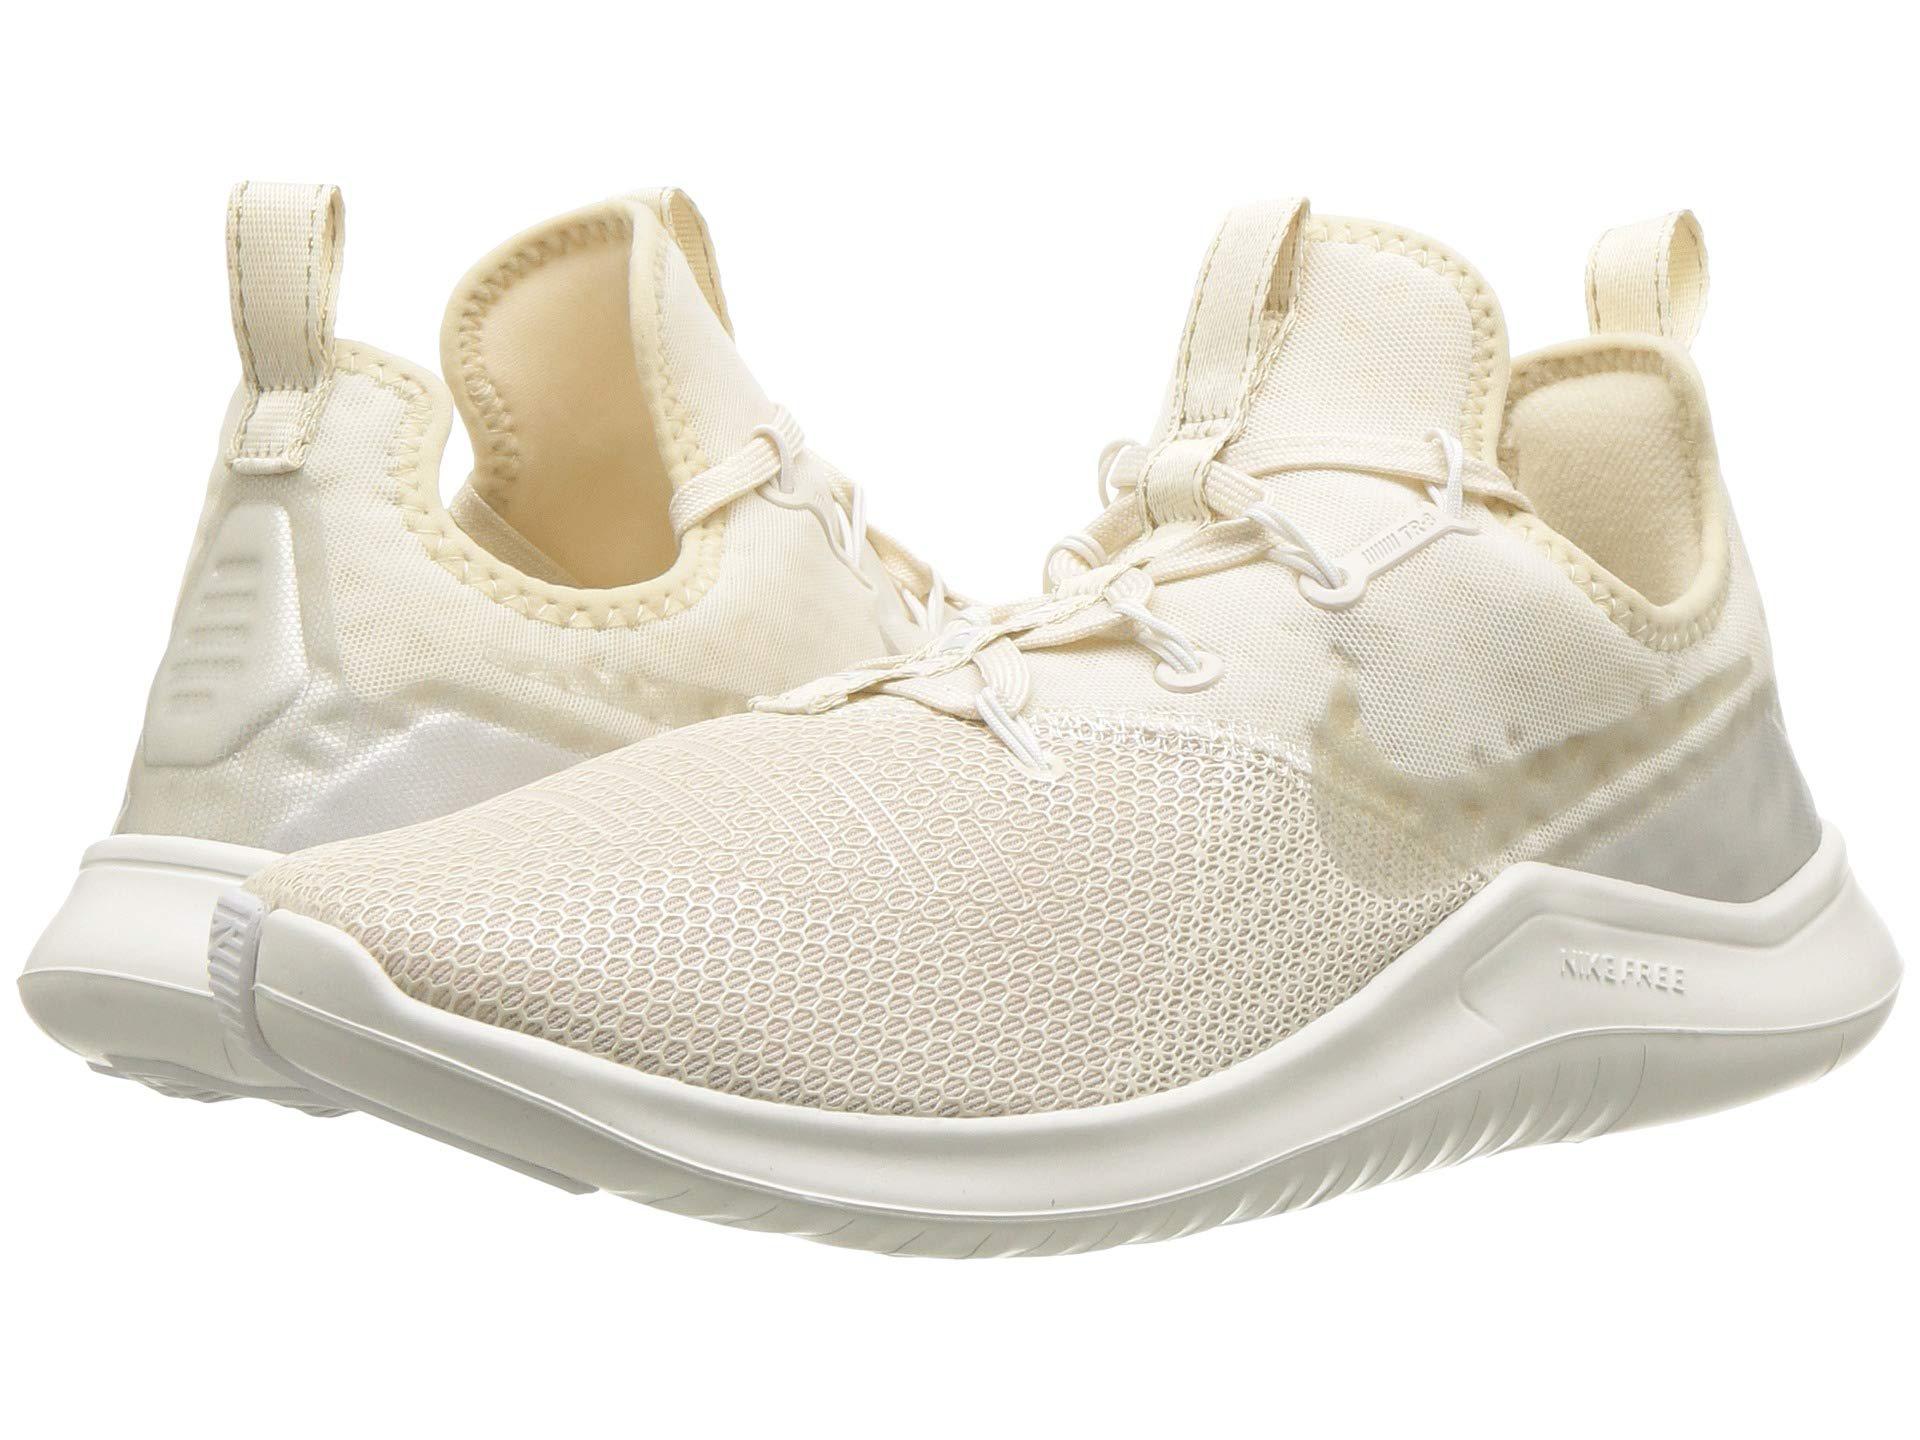 Nike Synthetic Free Tr 8 Champagne (light Cream/light Cream/platinum Tint)  Women's Cross Training Shoes in Natural | Lyst